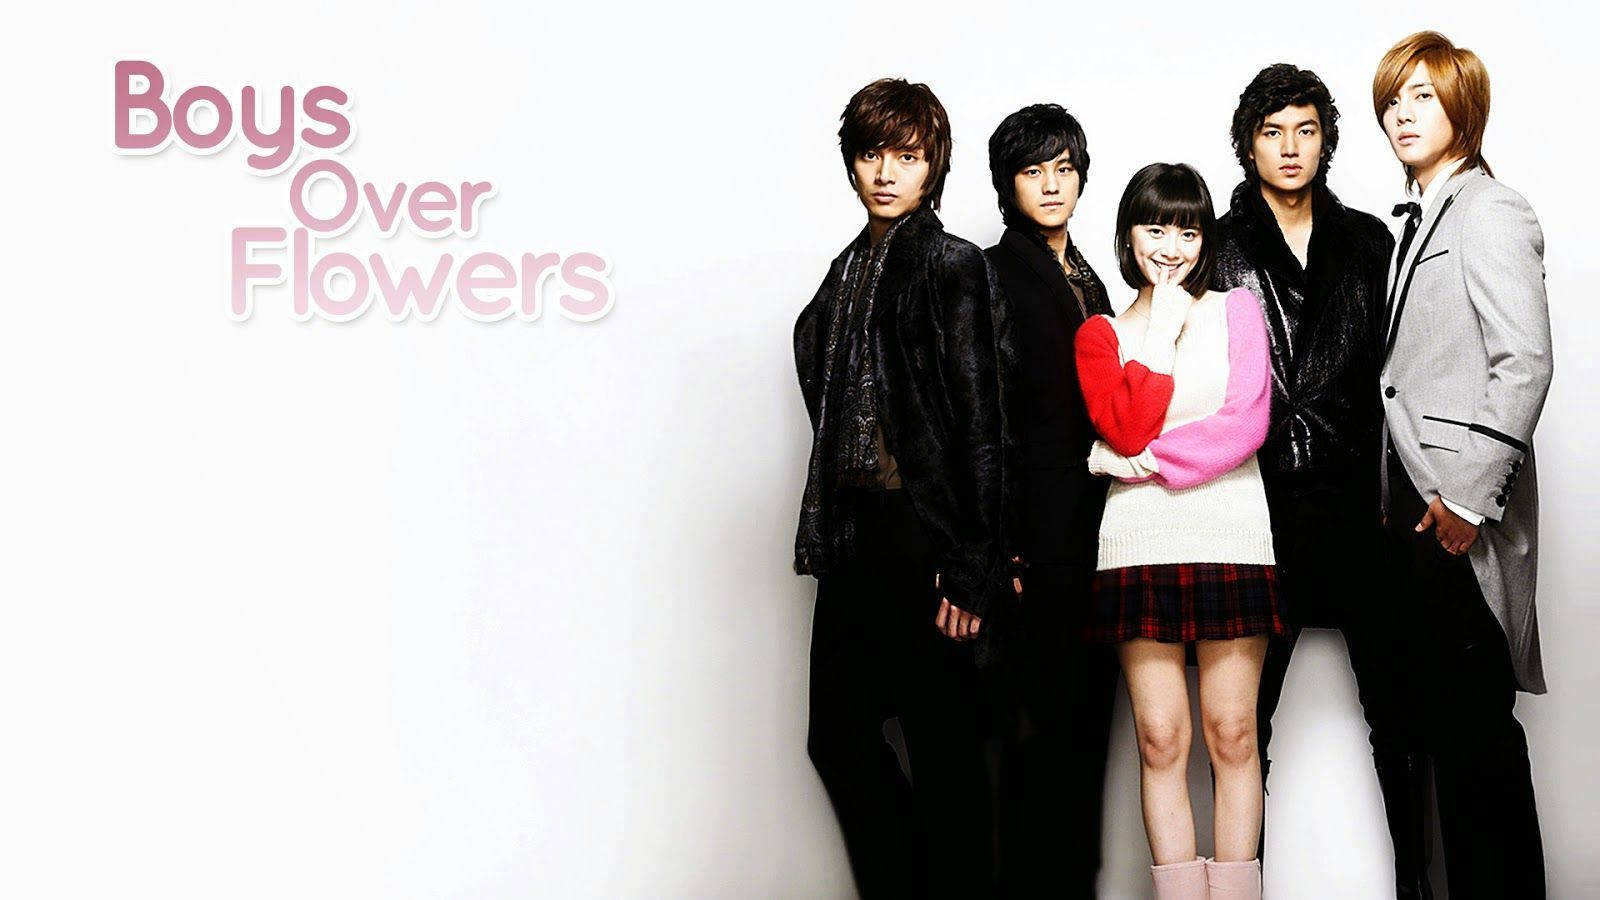 Boys Over Flowers - Classic Kdrama With Intense Teenage Love